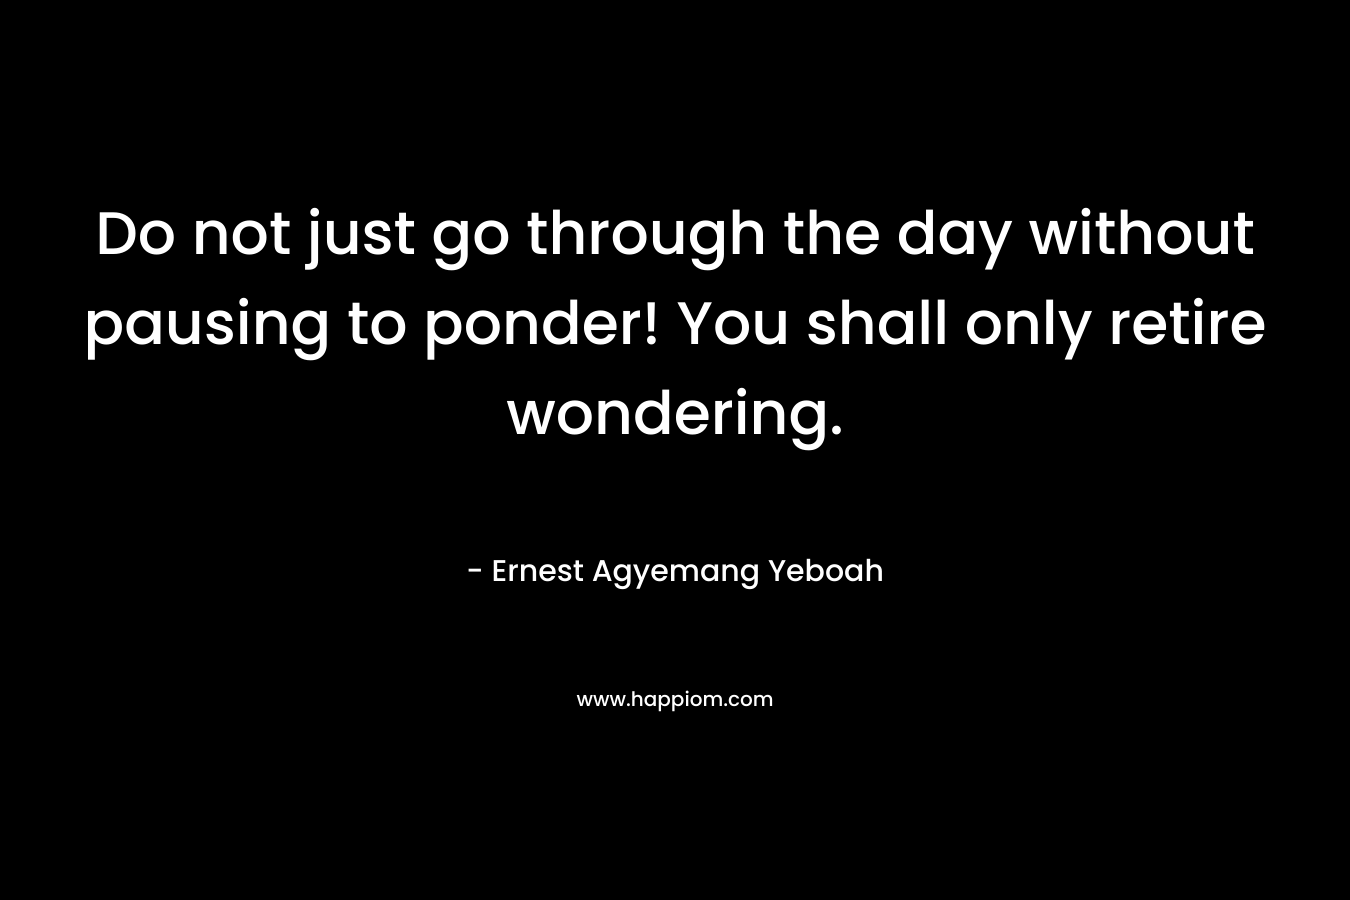 Do not just go through the day without pausing to ponder! You shall only retire wondering. – Ernest Agyemang Yeboah